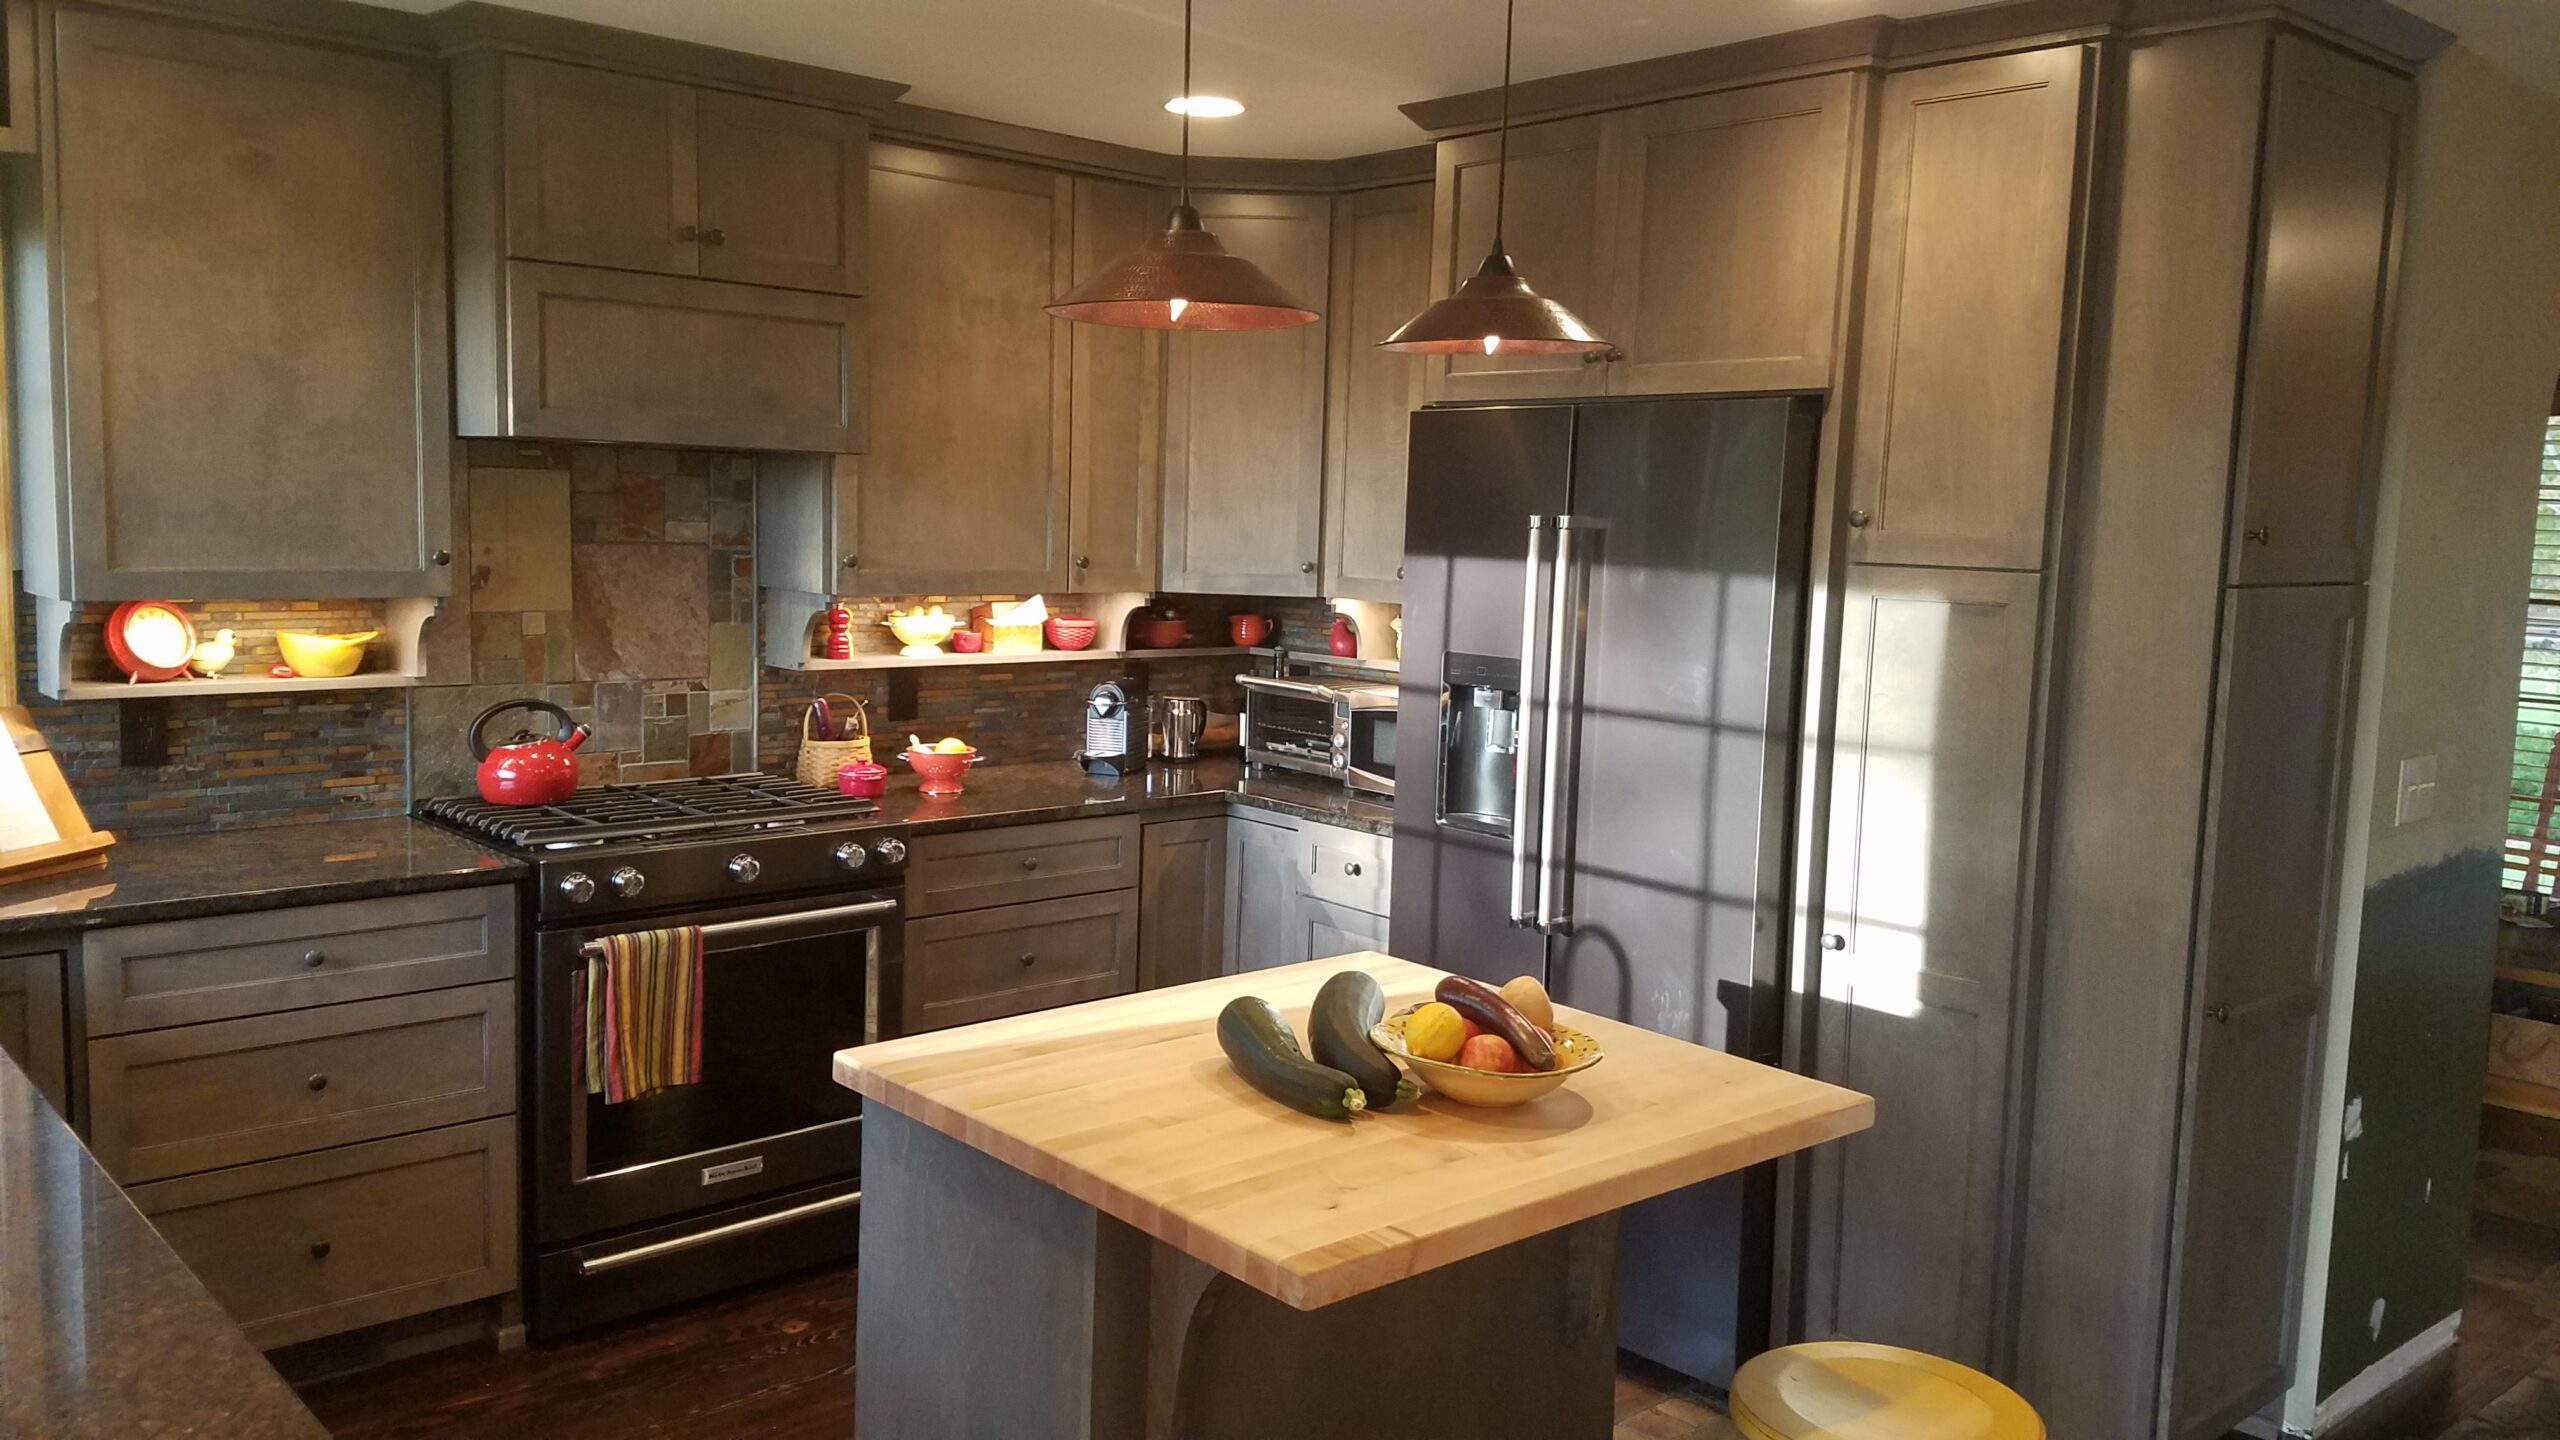 Kitchen Cabinet Trends for 2021 - Roberts Residential Remodeling